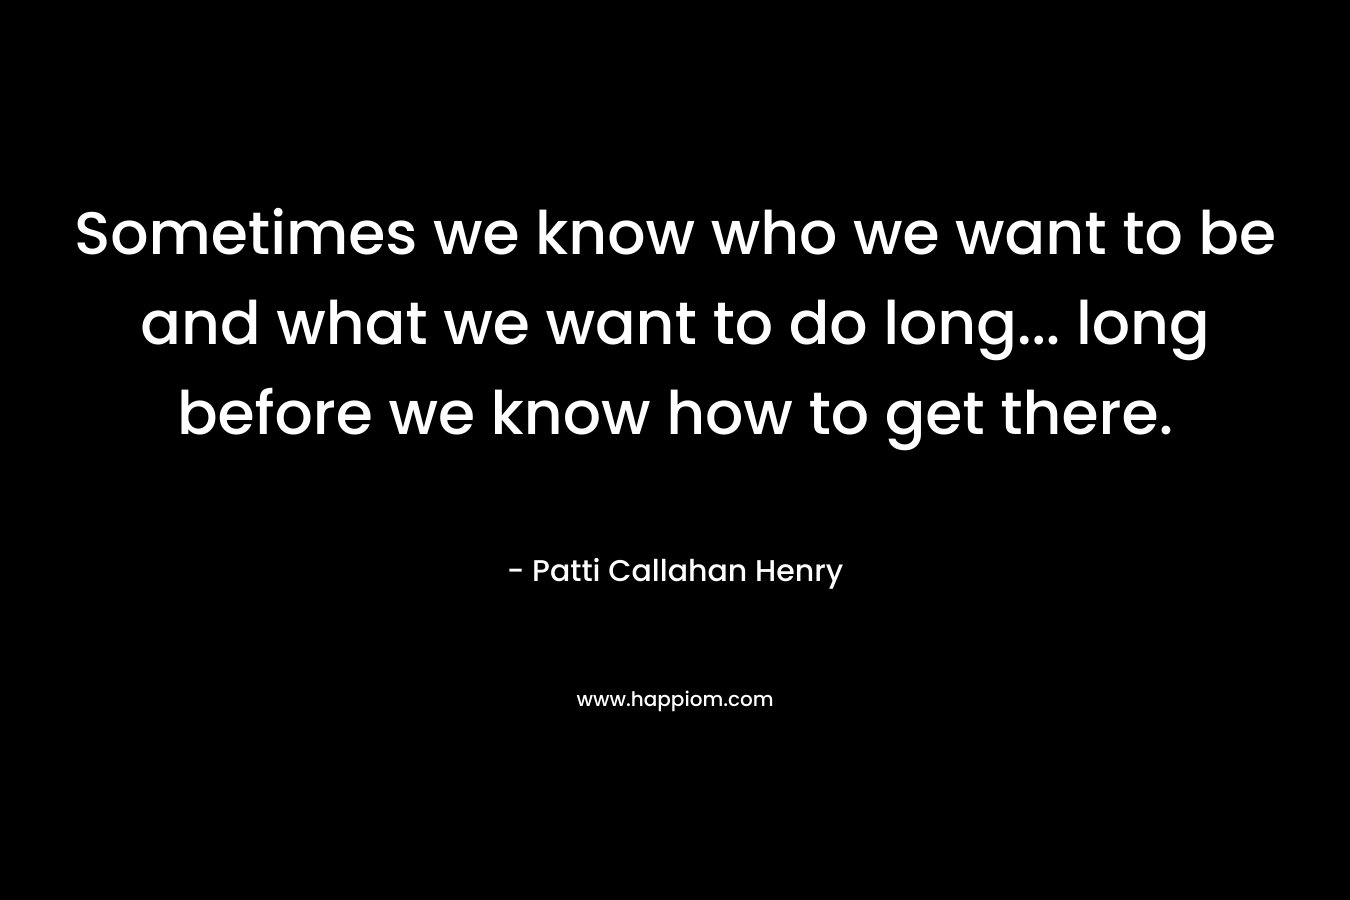 Sometimes we know who we want to be and what we want to do long... long before we know how to get there.